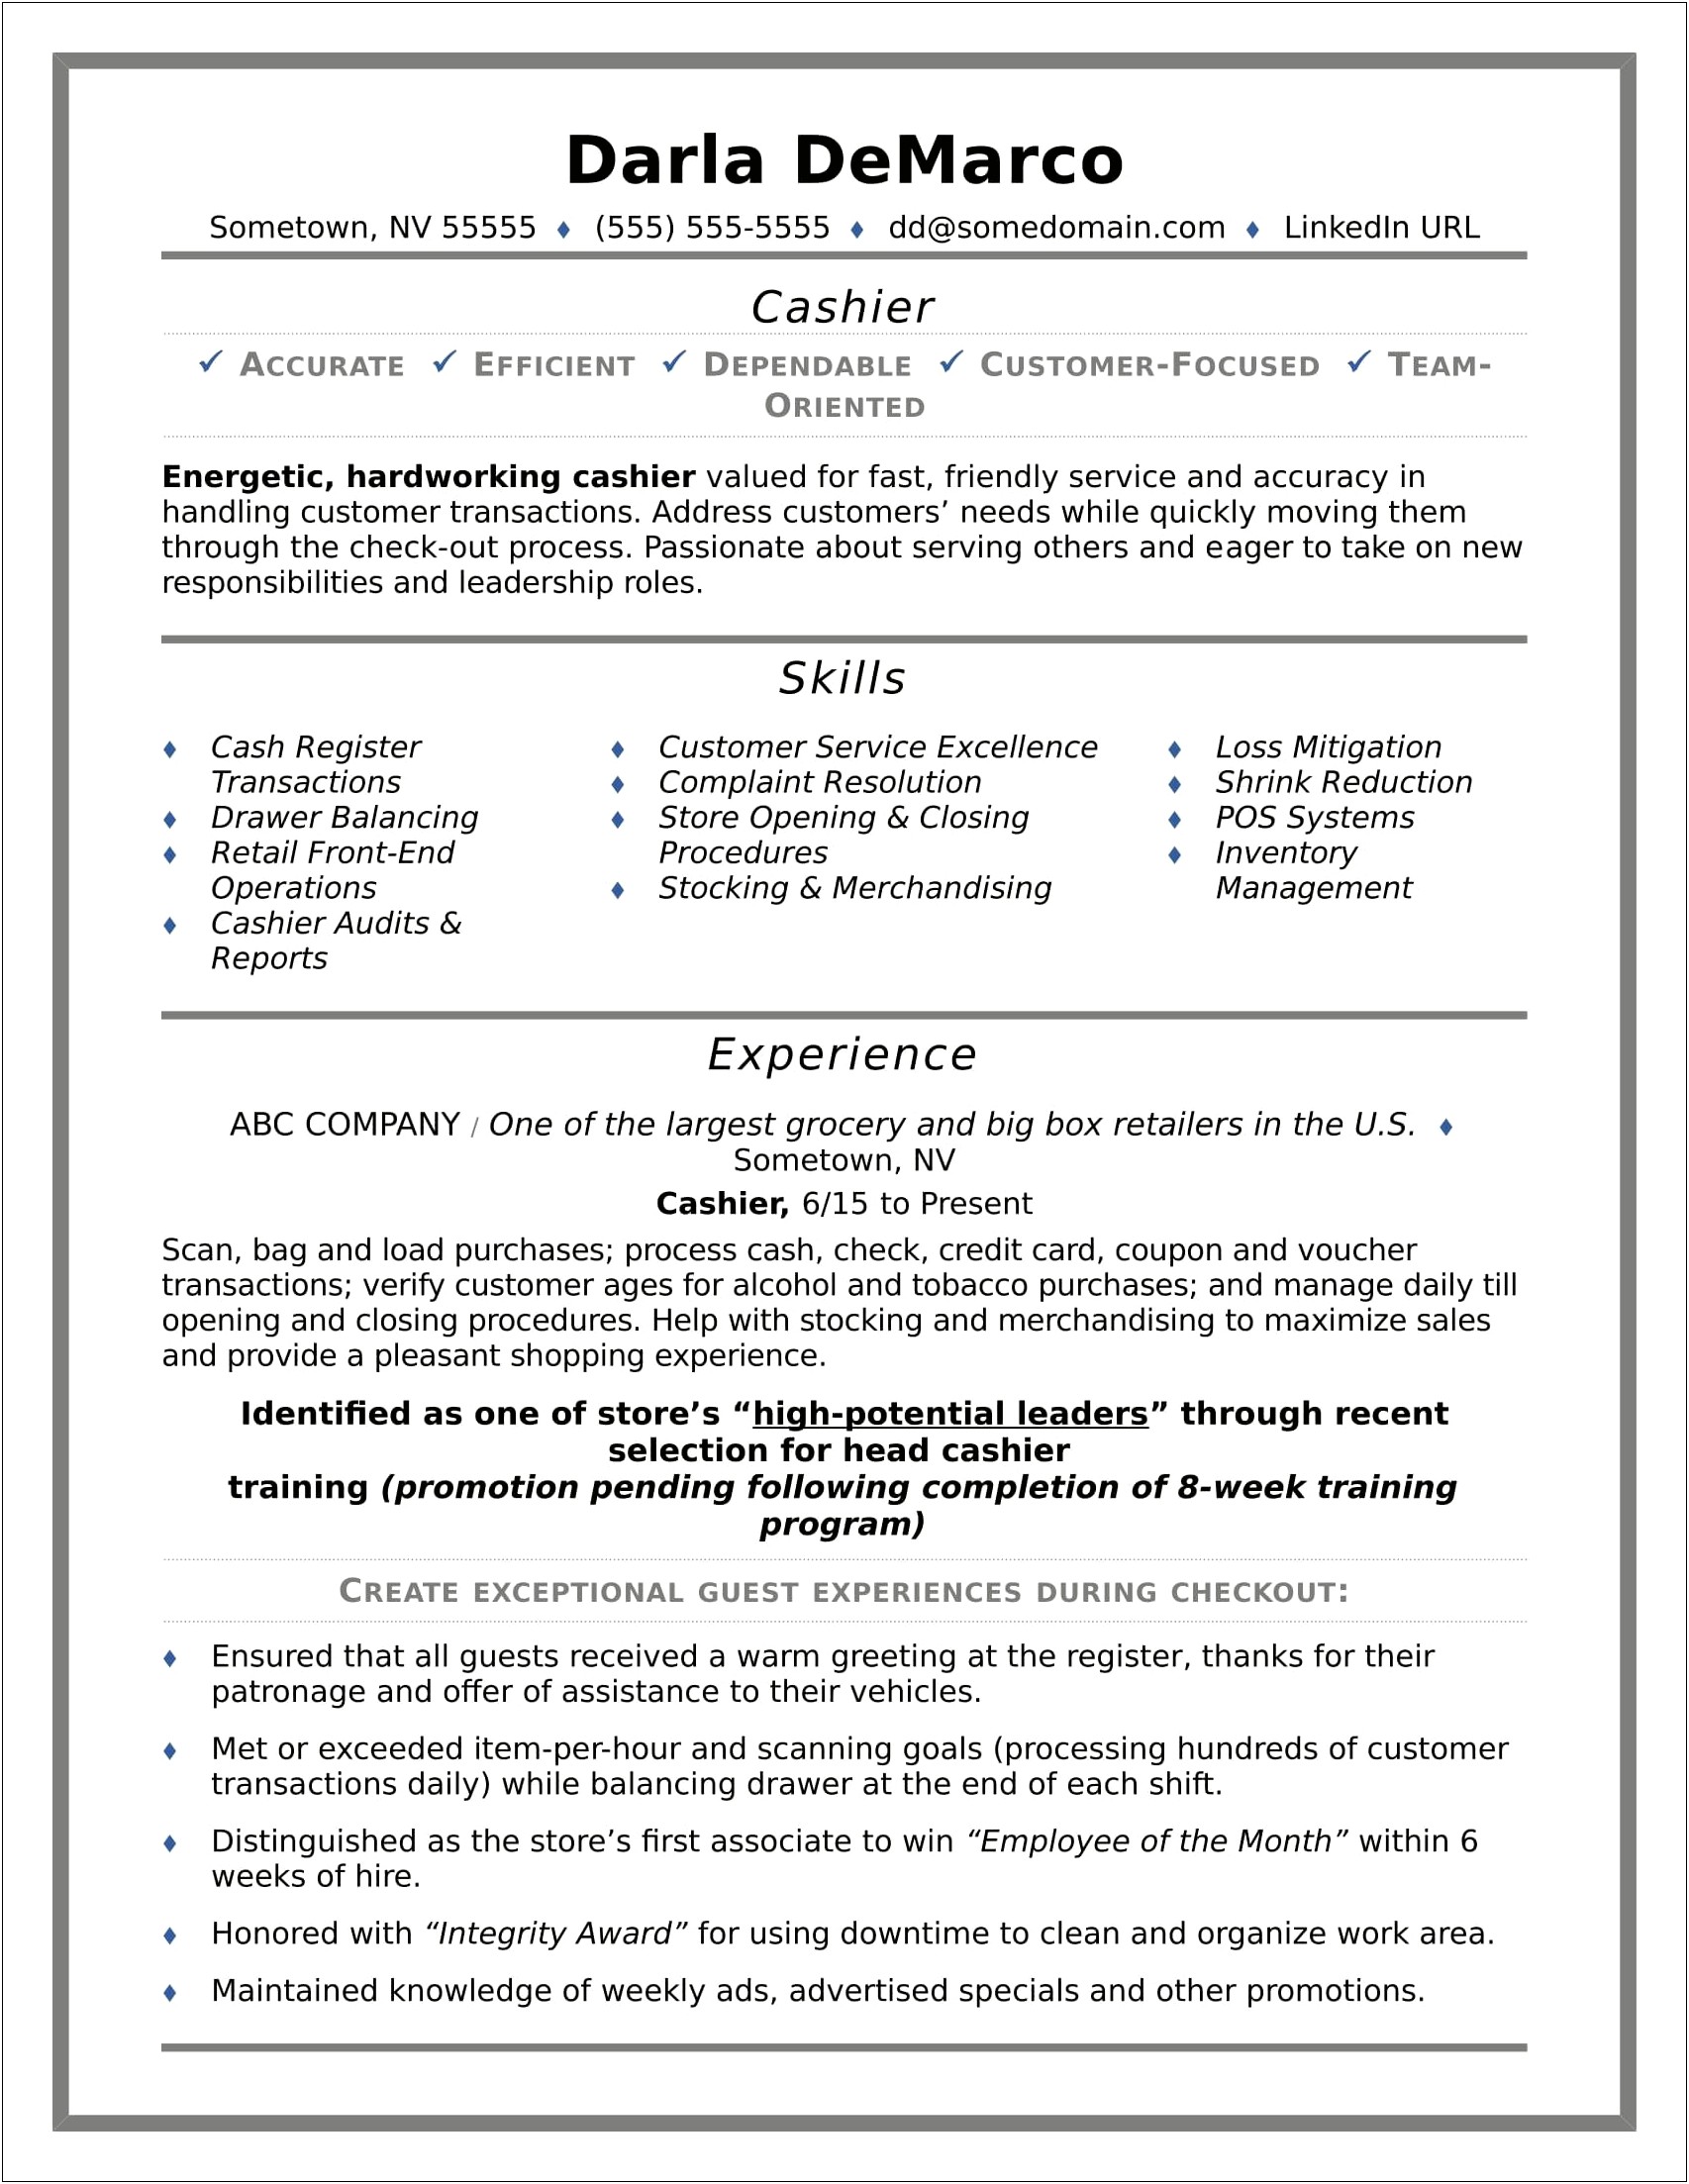 Skills For A Cashier Resume Example